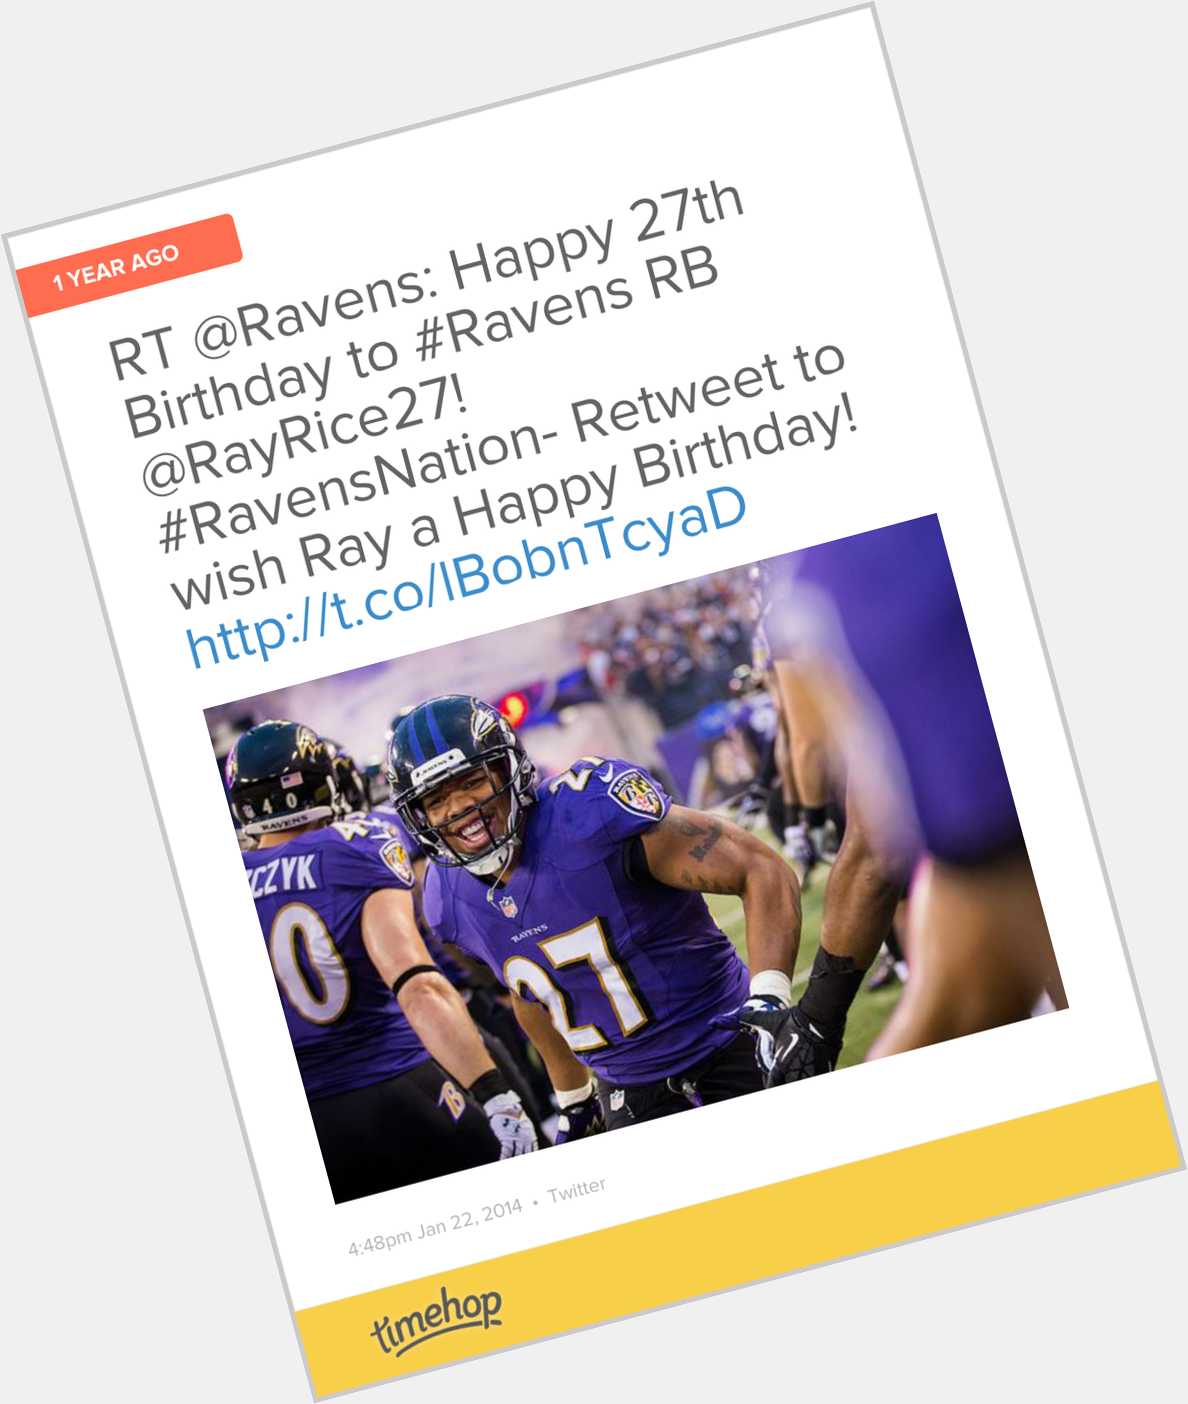 One year ago was Ray Rice 27th birthday !!HAPPY BIRTHDAY TO YOU! !   